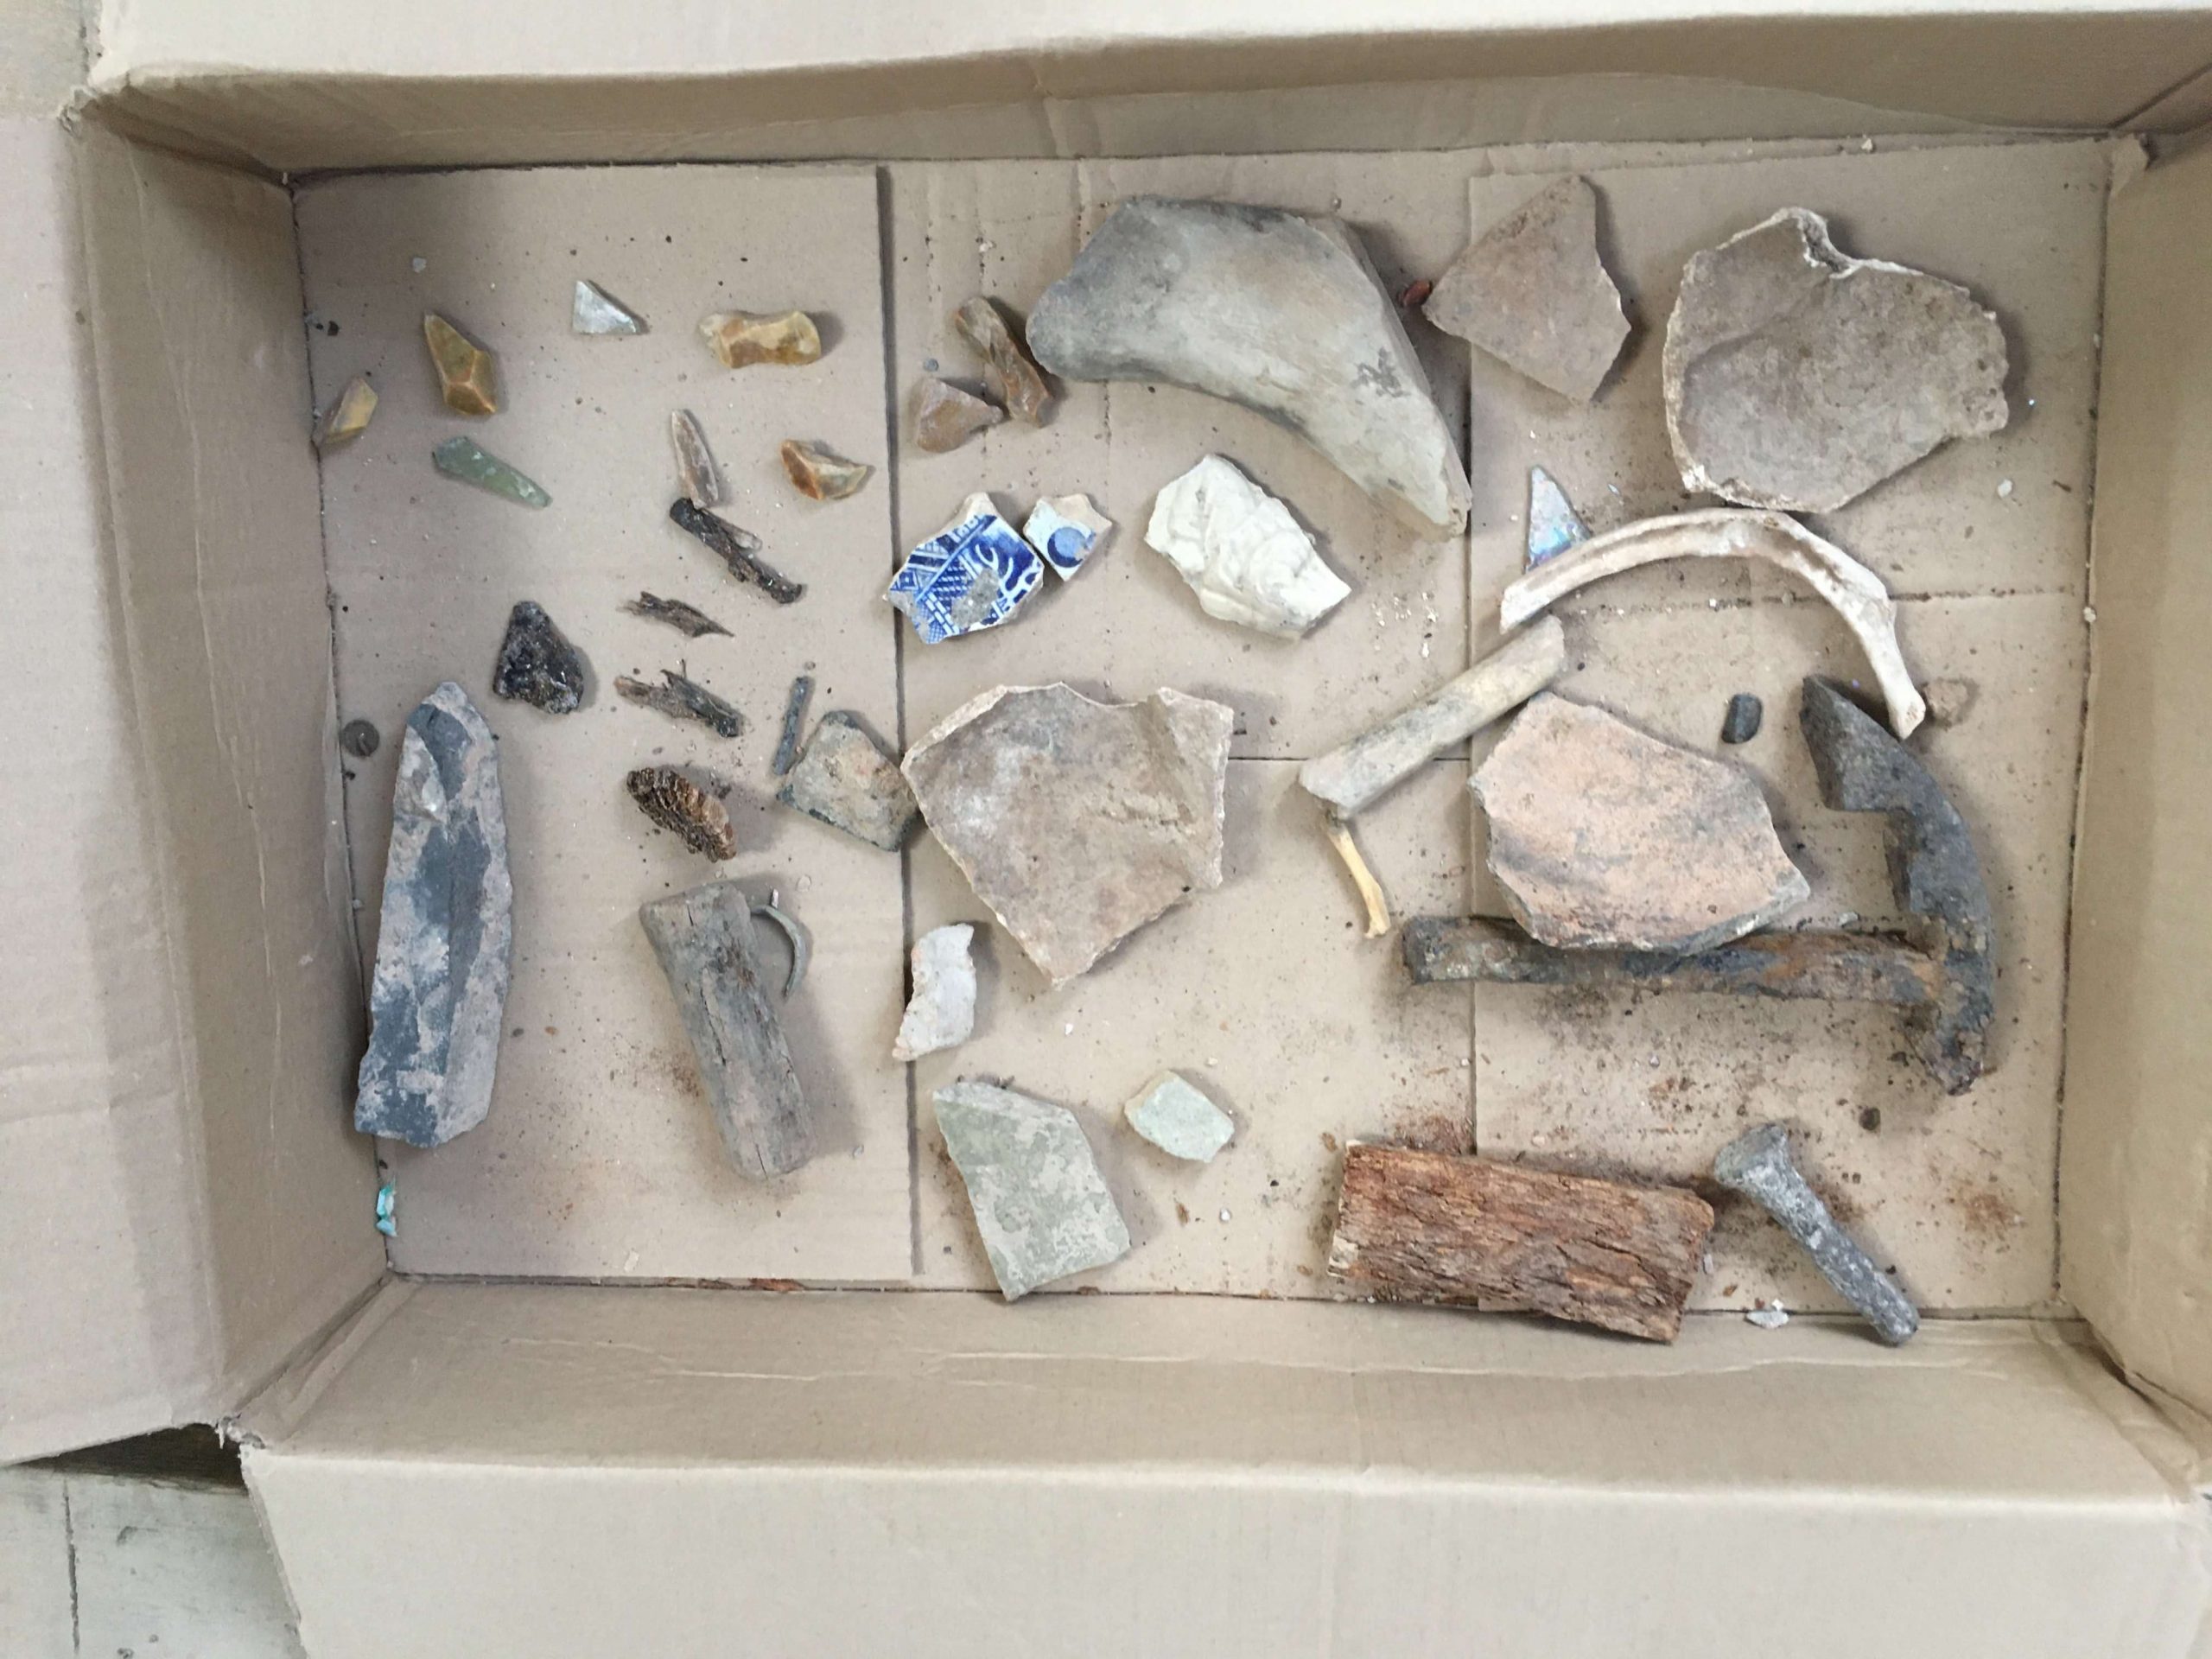 2: Archaeological finds